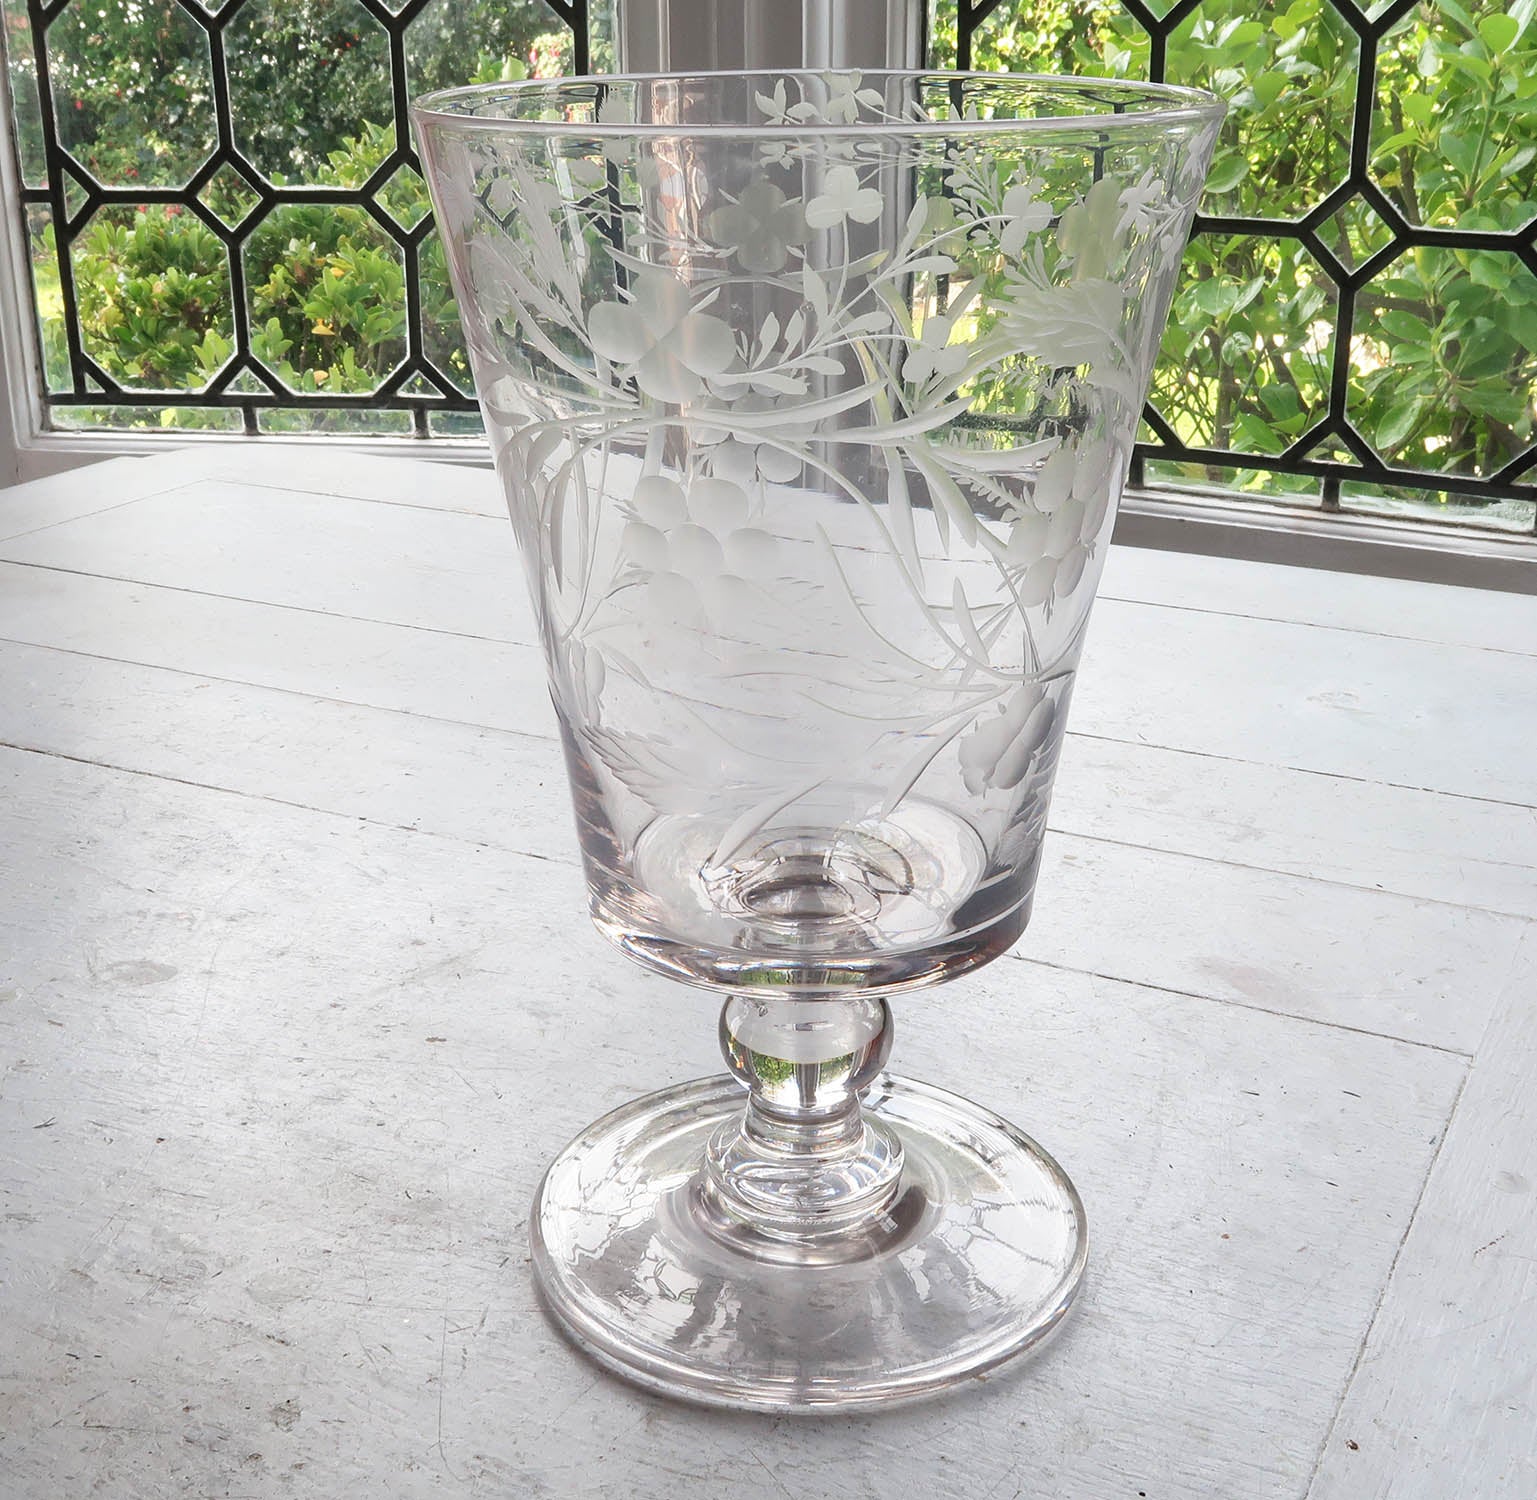 Superb glass flower vase. 

Lovely quality engraving.

Georgian style shape

Good condition

Engraved ownership inscription on the side 